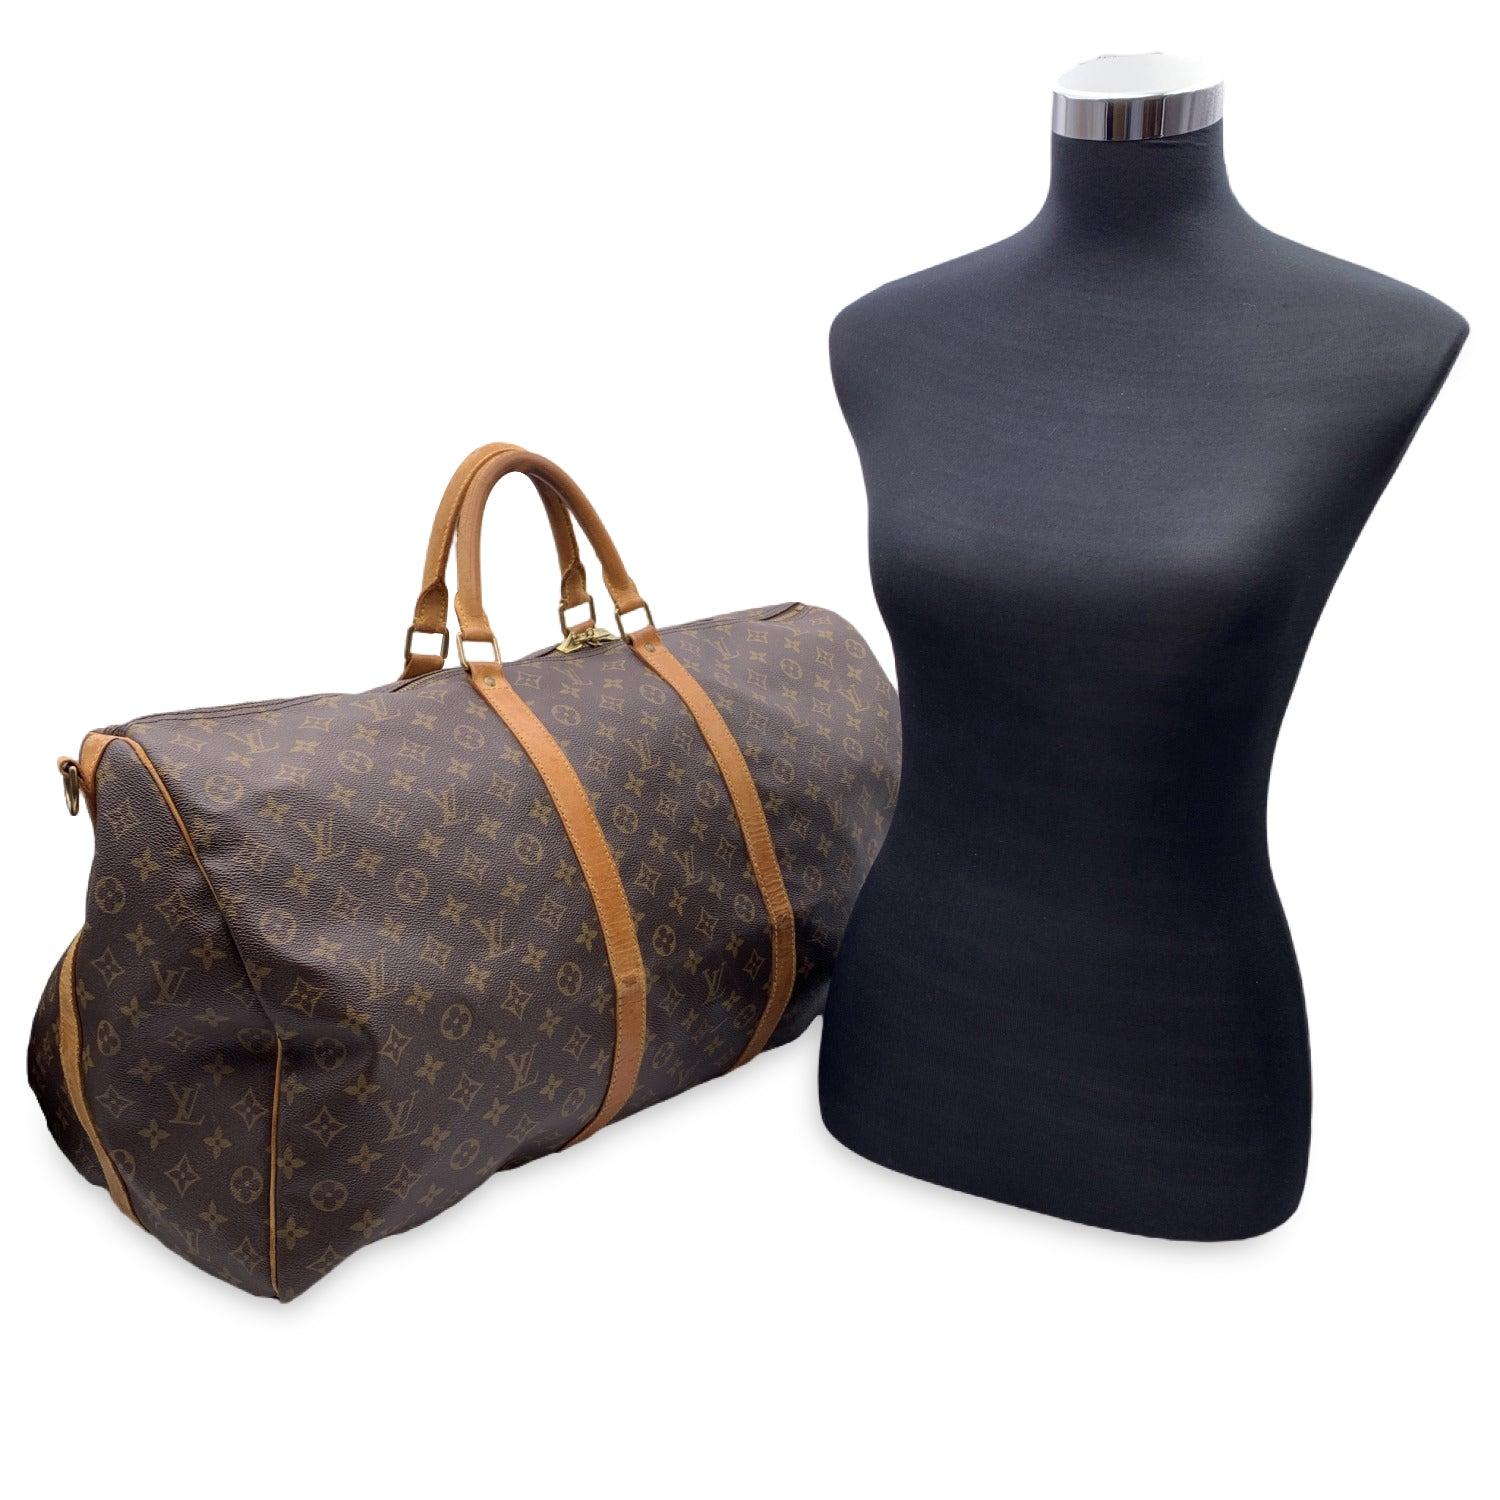 This beautiful Bag will come with a Certificate of Authenticity provided by Entrupy. The certificate will be provided at no further cost. Louis Vuitton 'Keepall 60' Travel bag. Monogram canvas and beige leather trim. Double zip closure with original